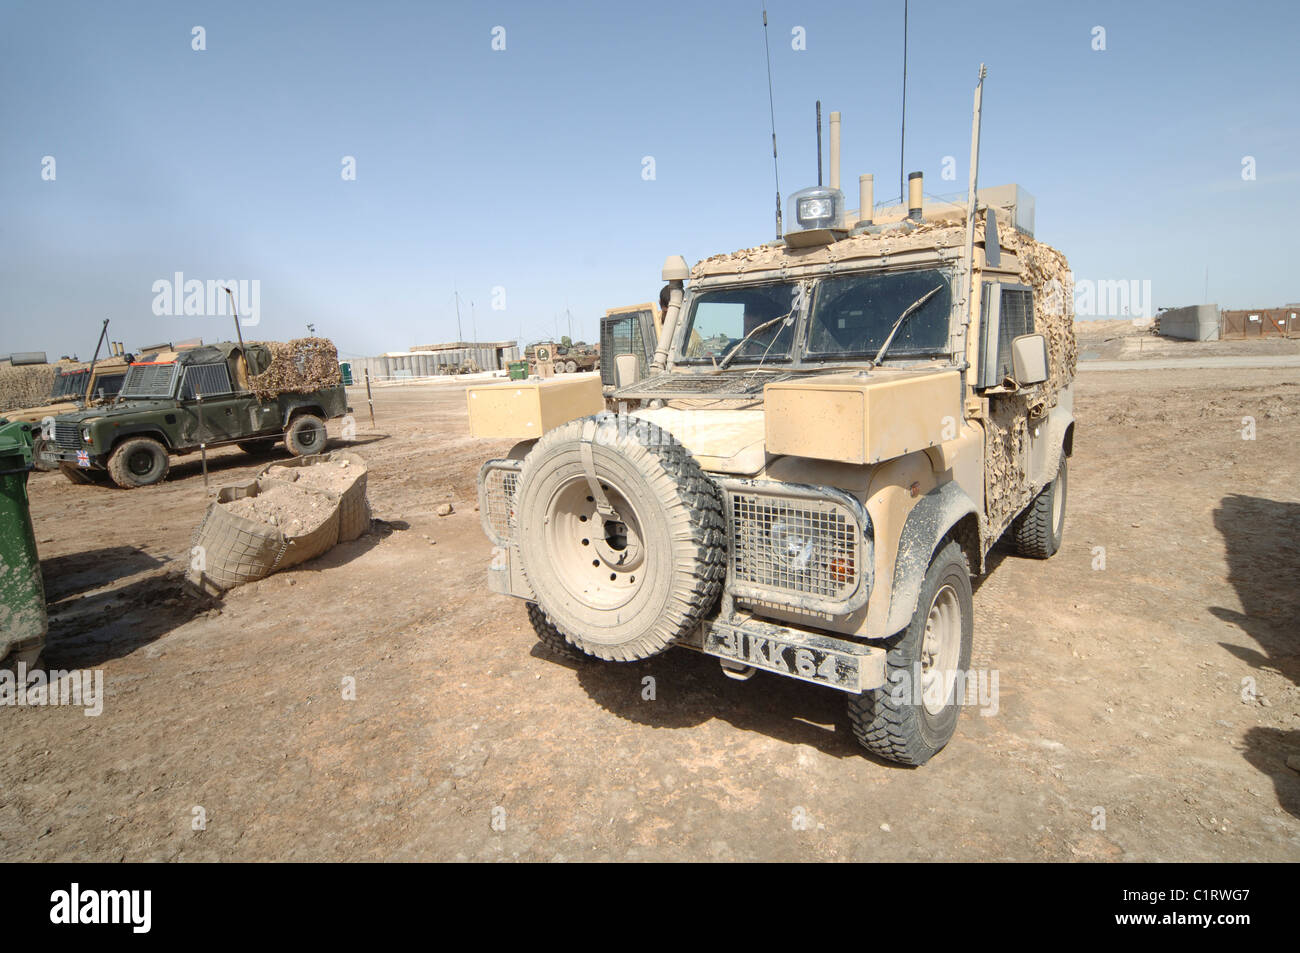 Camp Condor, Iraq - The Snatch Land Rover patrol vehicle used by the British Army. Stock Photo